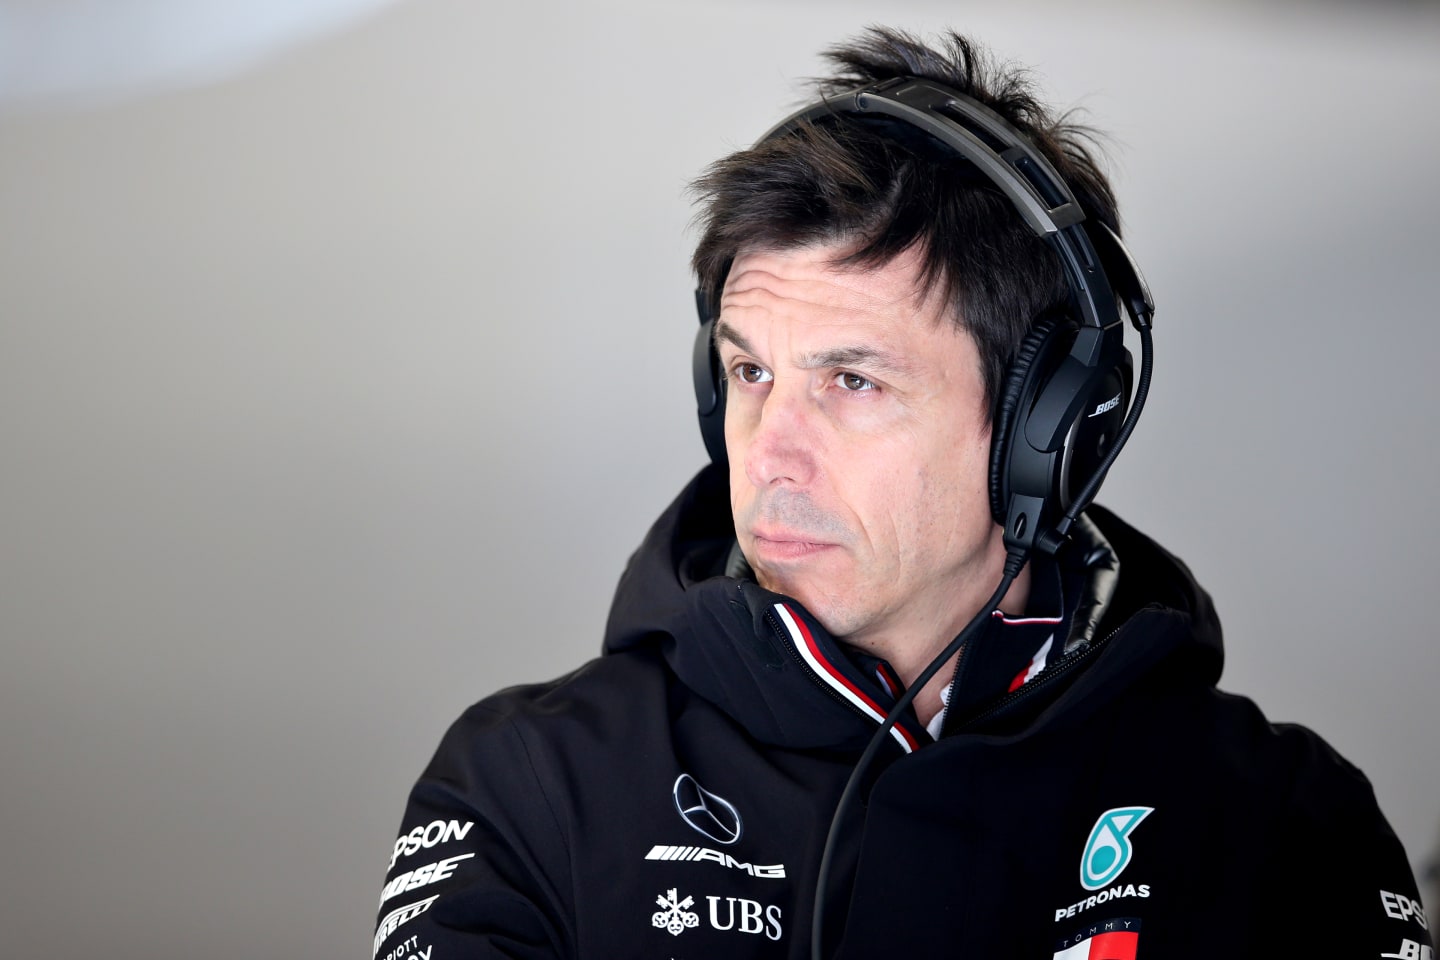 BARCELONA, SPAIN - FEBRUARY 19: Mercedes GP Executive Director Toto Wolff looks on from the garage